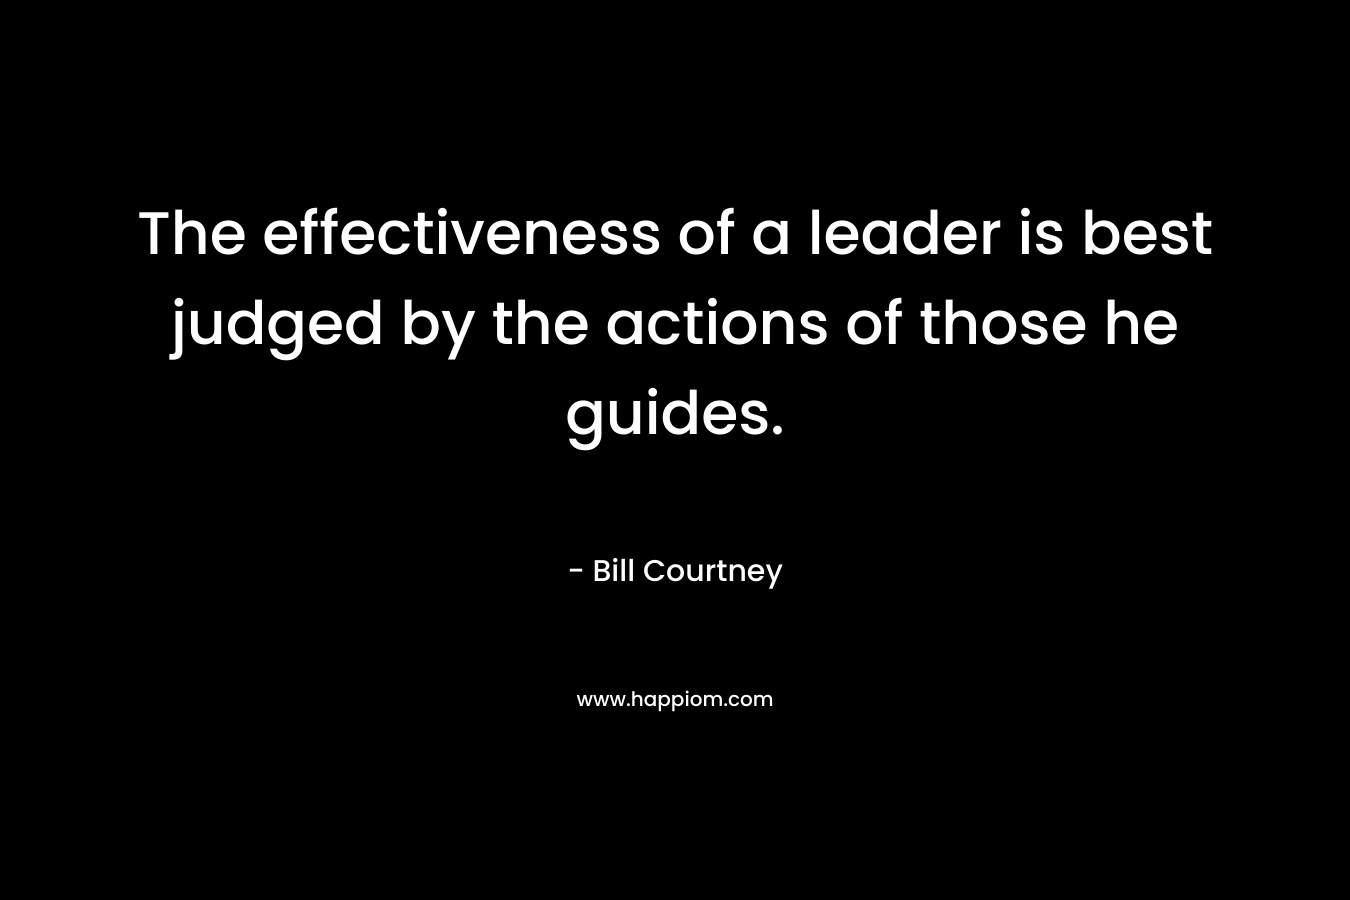 The effectiveness of a leader is best judged by the actions of those he guides.